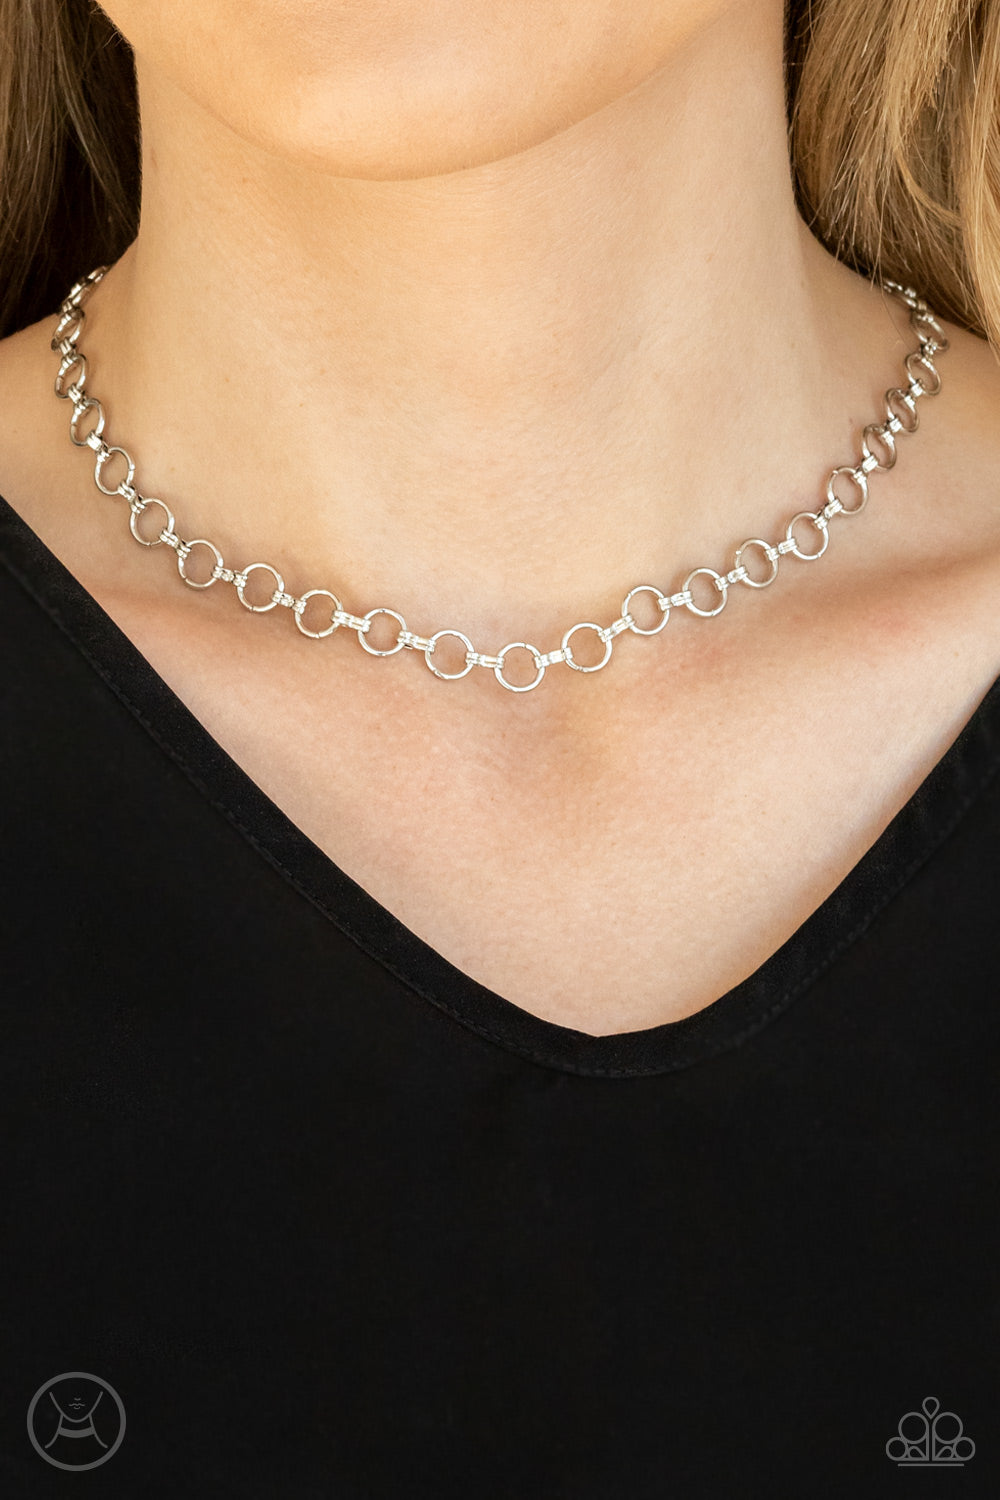 Insta Connection - Silver Necklace - Paparazzi Accessories